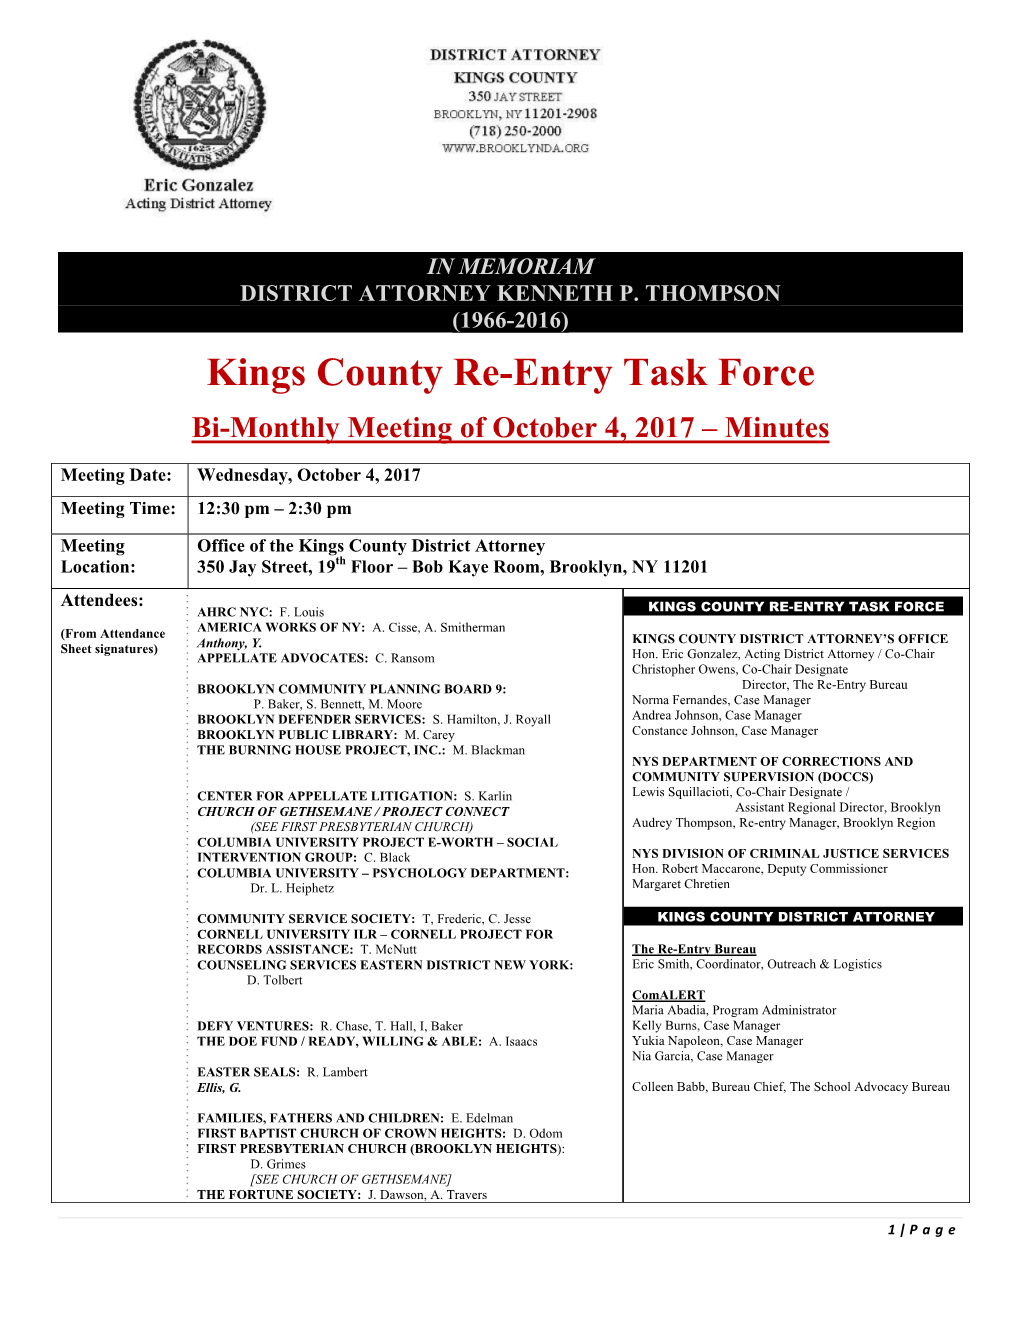 Kings County Re-Entry Task Force